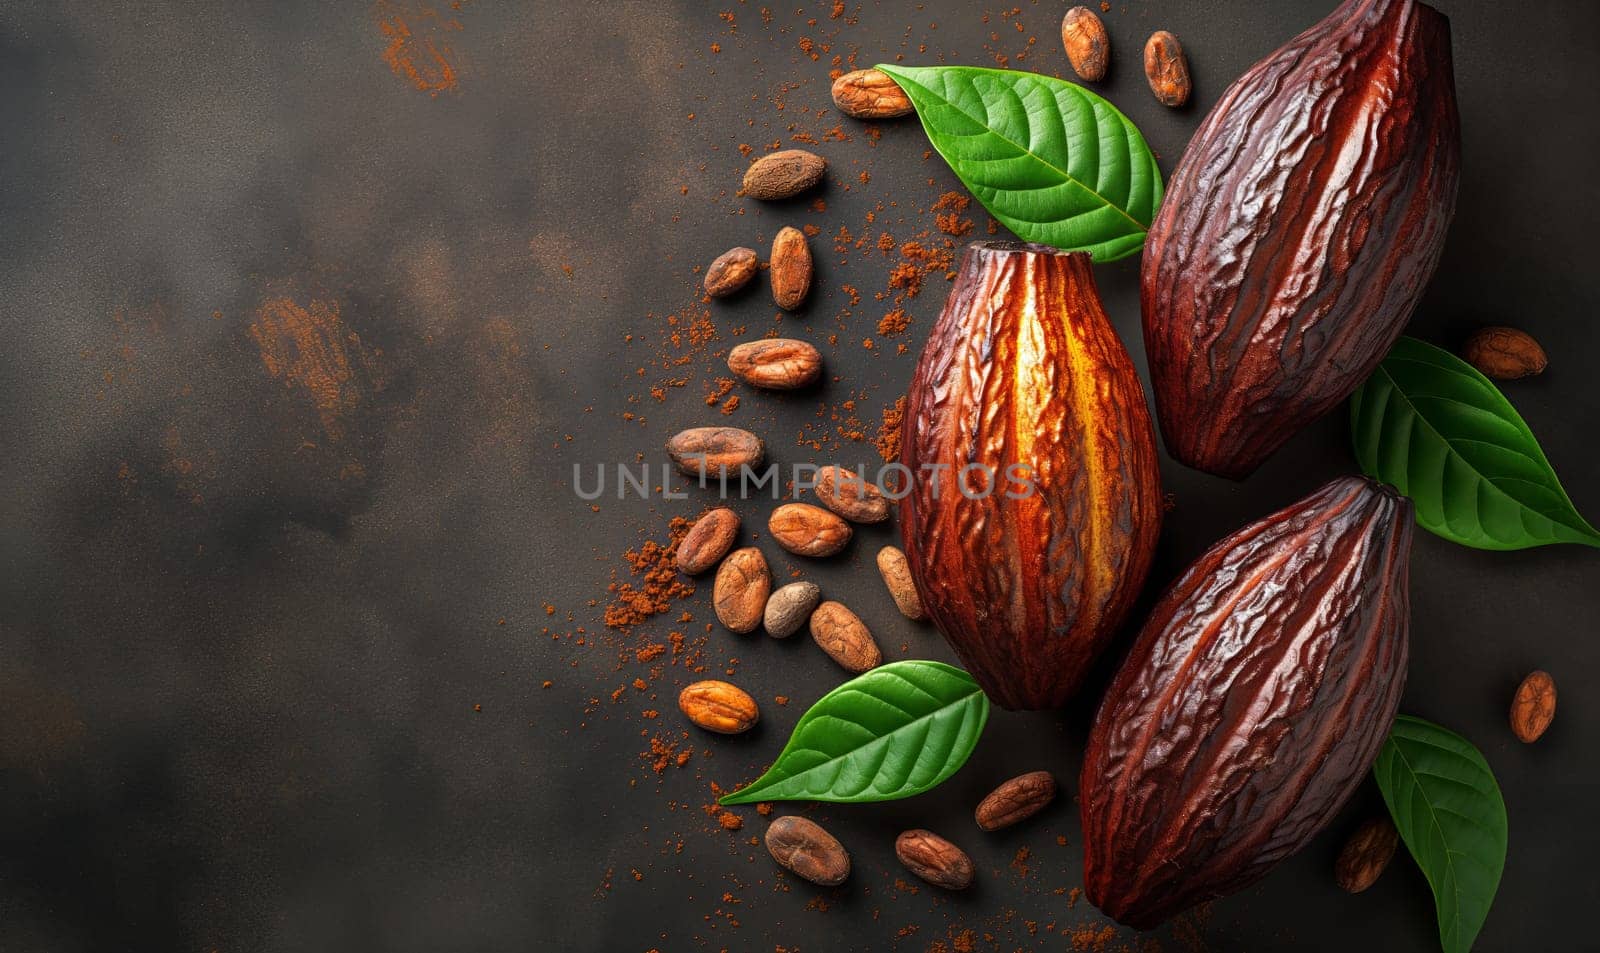 Food background with cocoa fruit on wooden table. Selective soft focus.